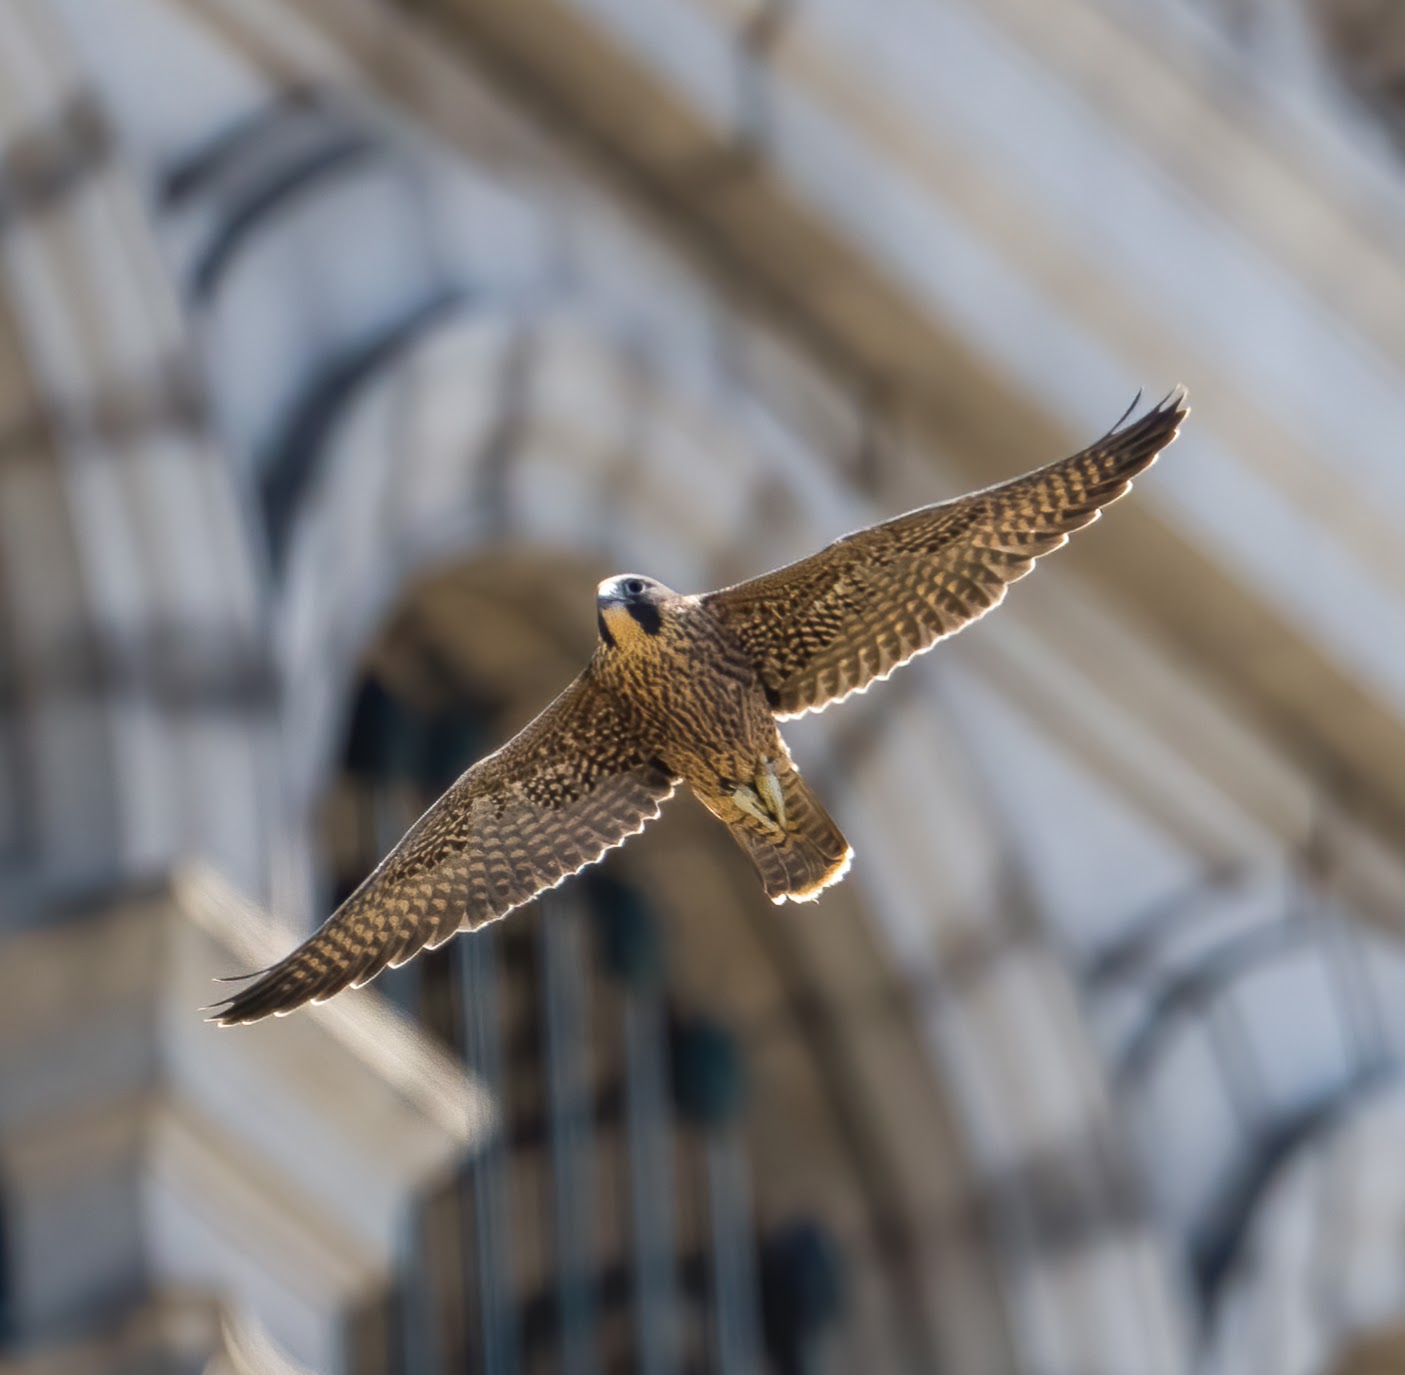 Sol, one of the two young female falcons, flies for the first time on Tuesday, June 4, past the observation deck of the Campanile.